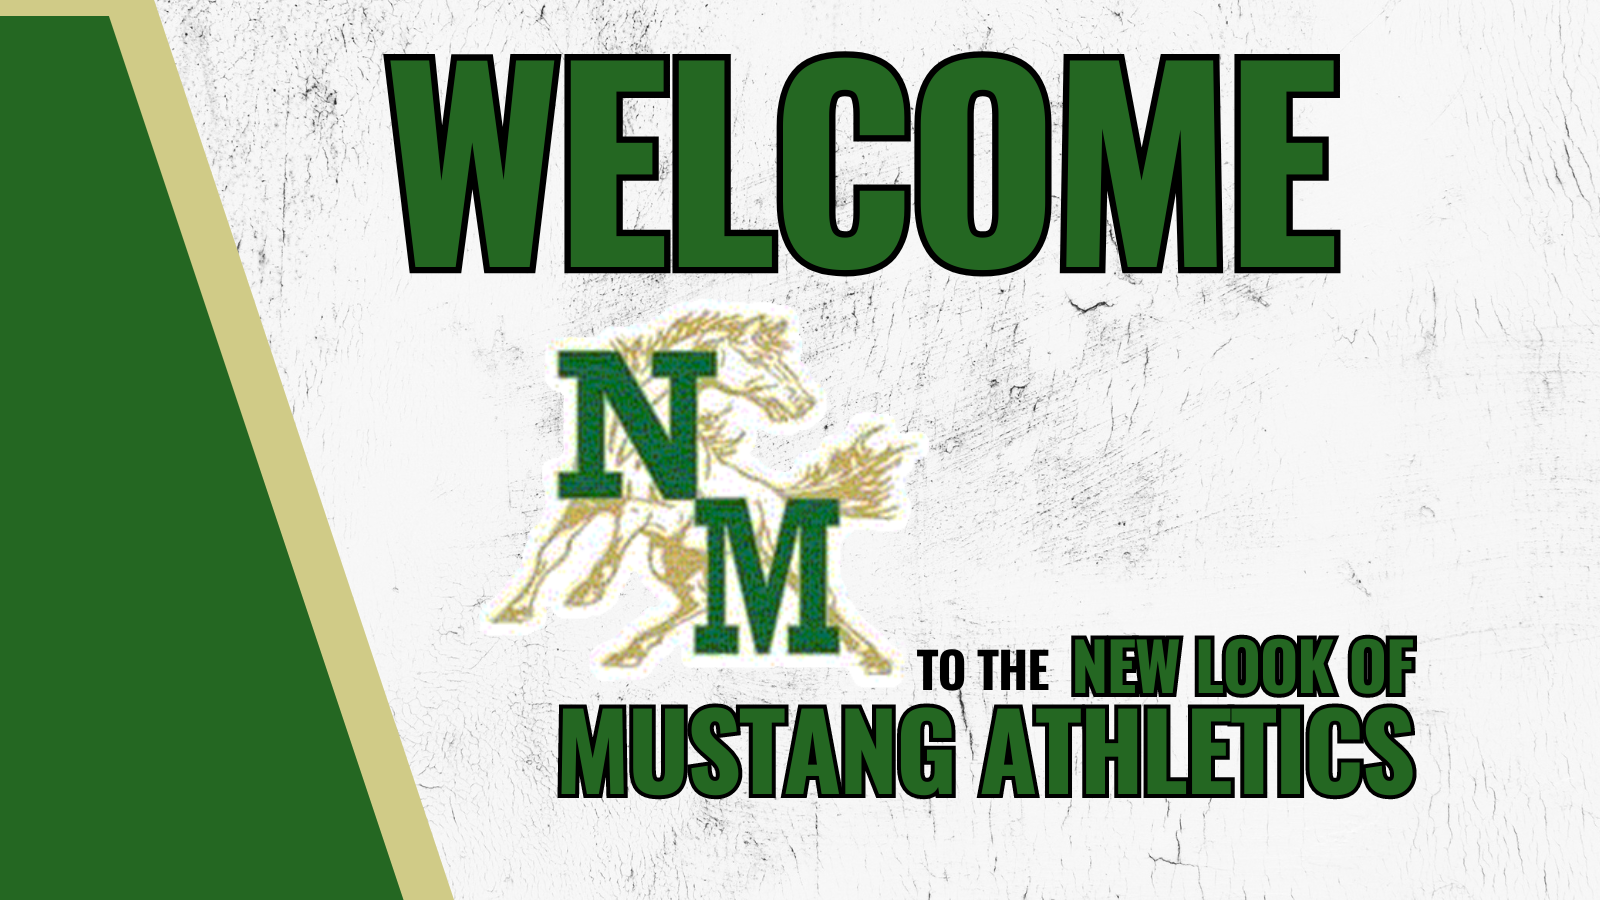 1716406221_Announcement.png - Image for 🎉 Exciting News for Mustang Athletics Fans! 🎉